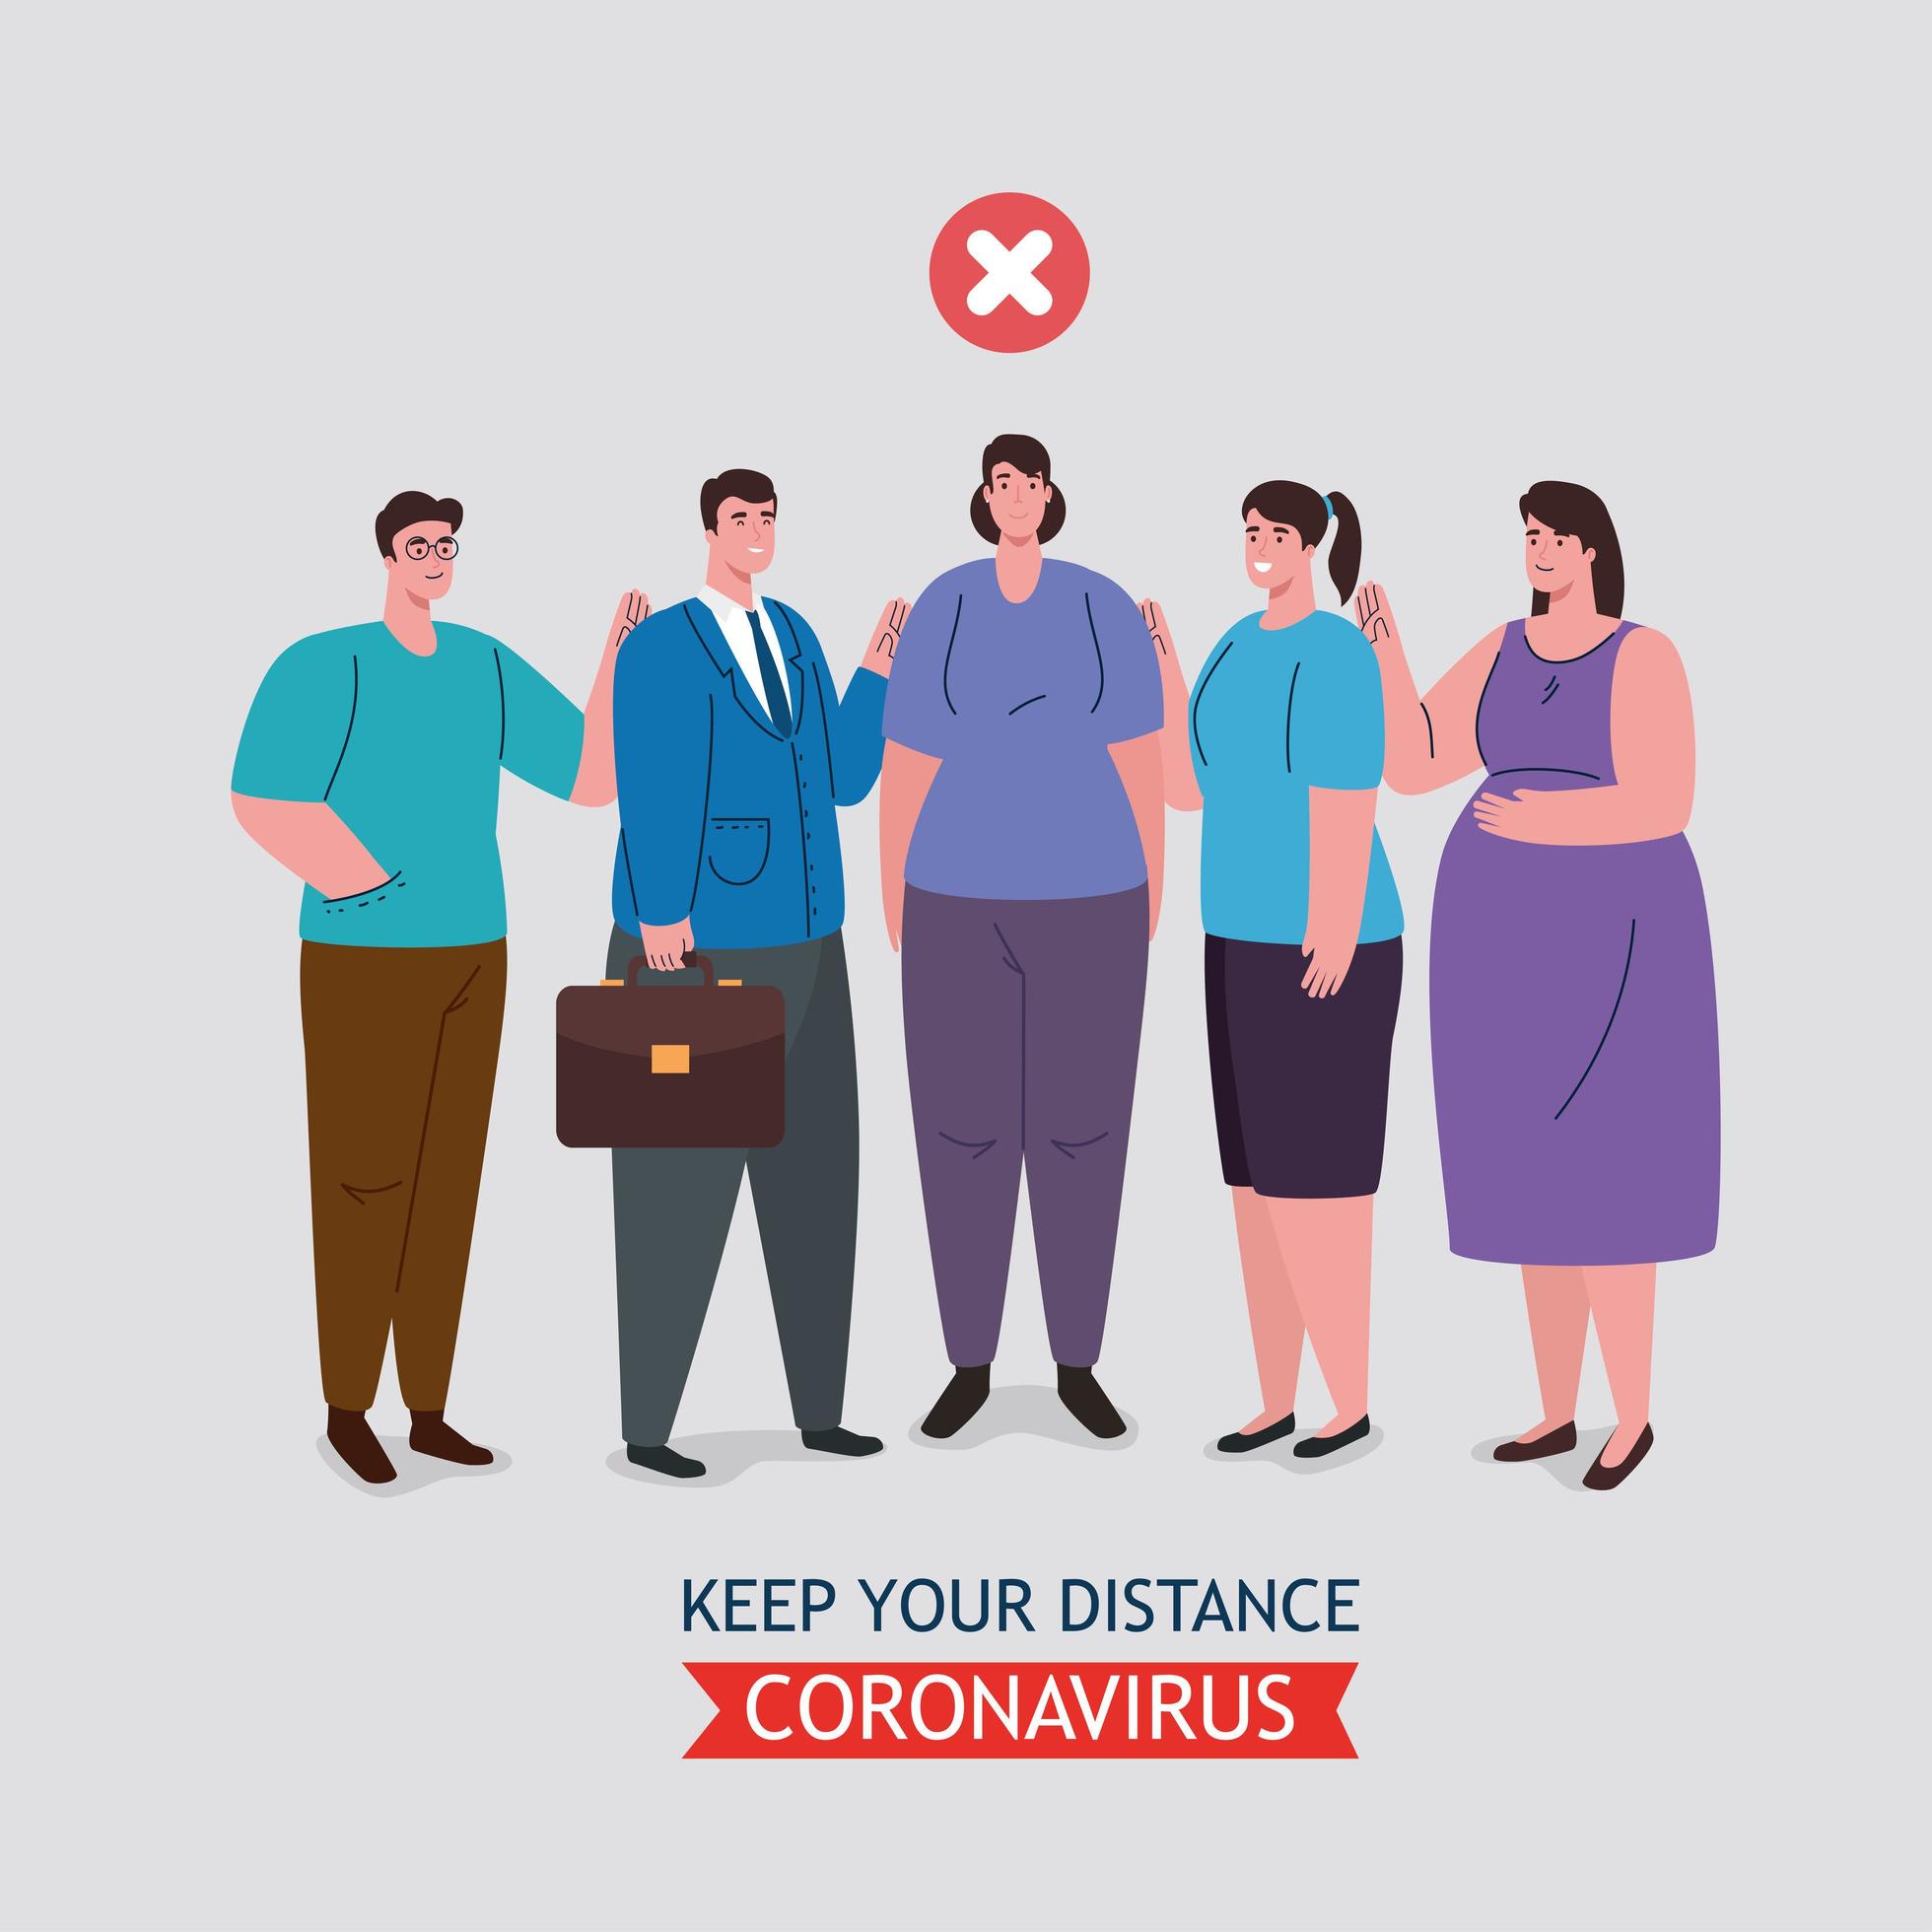 social distancing done in the wrong way, people keeping not safe distance, prevention coronavirus covid 19 vector